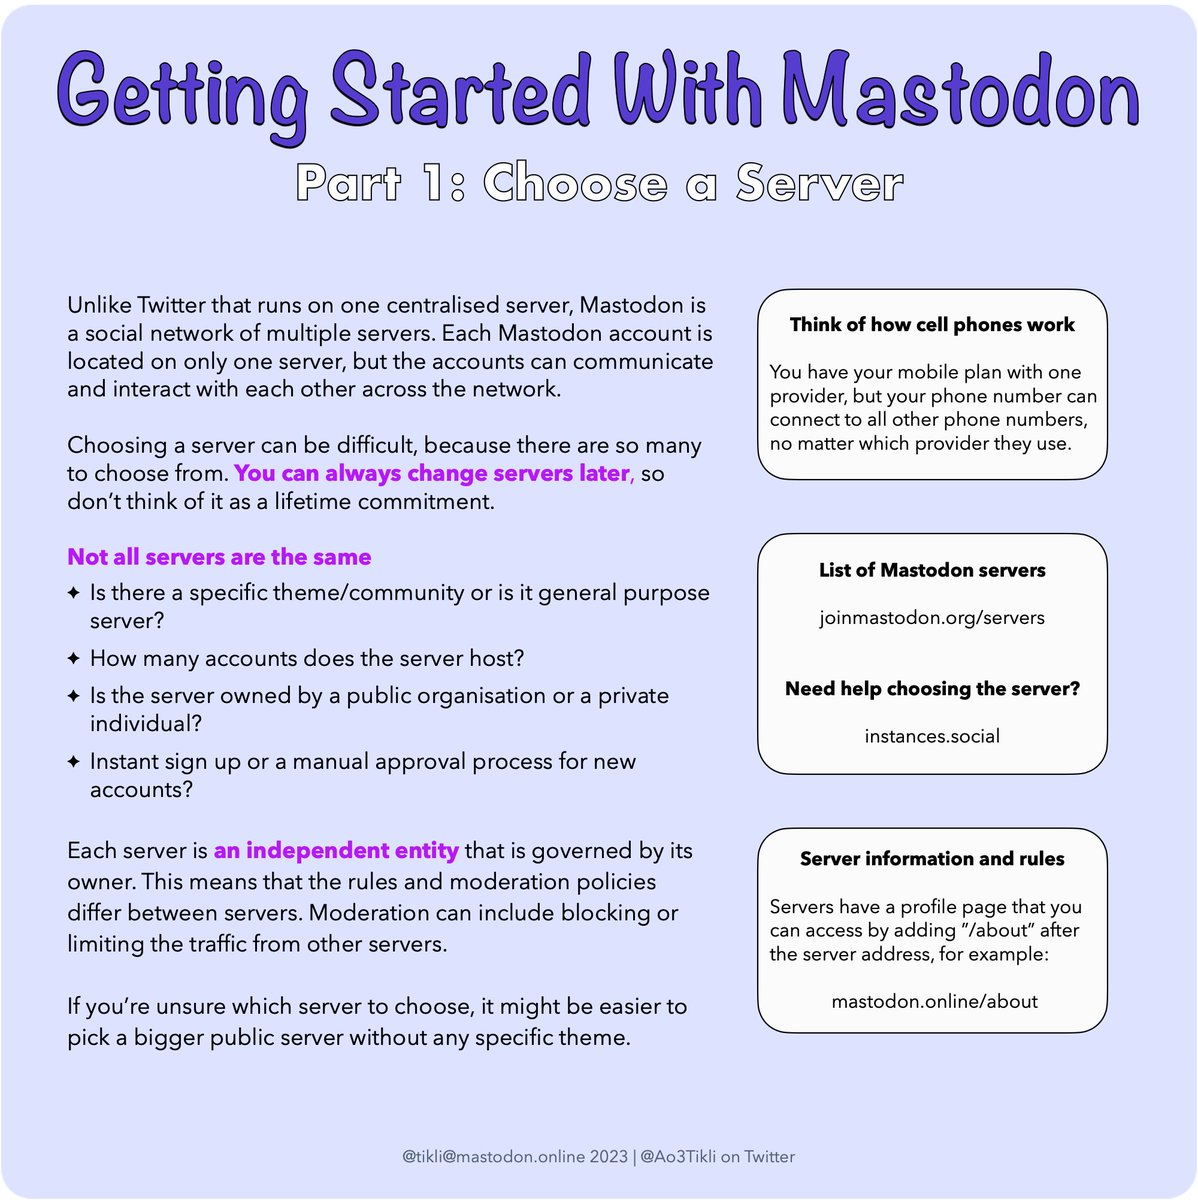 Getting Started With Mastodon
Part 1/8: Choose a Server

If you'd rather read this tutorial as text, go here: pillowfort.social/posts/3458185

#Mastodon #MastodonMigration #MastodonTutorial